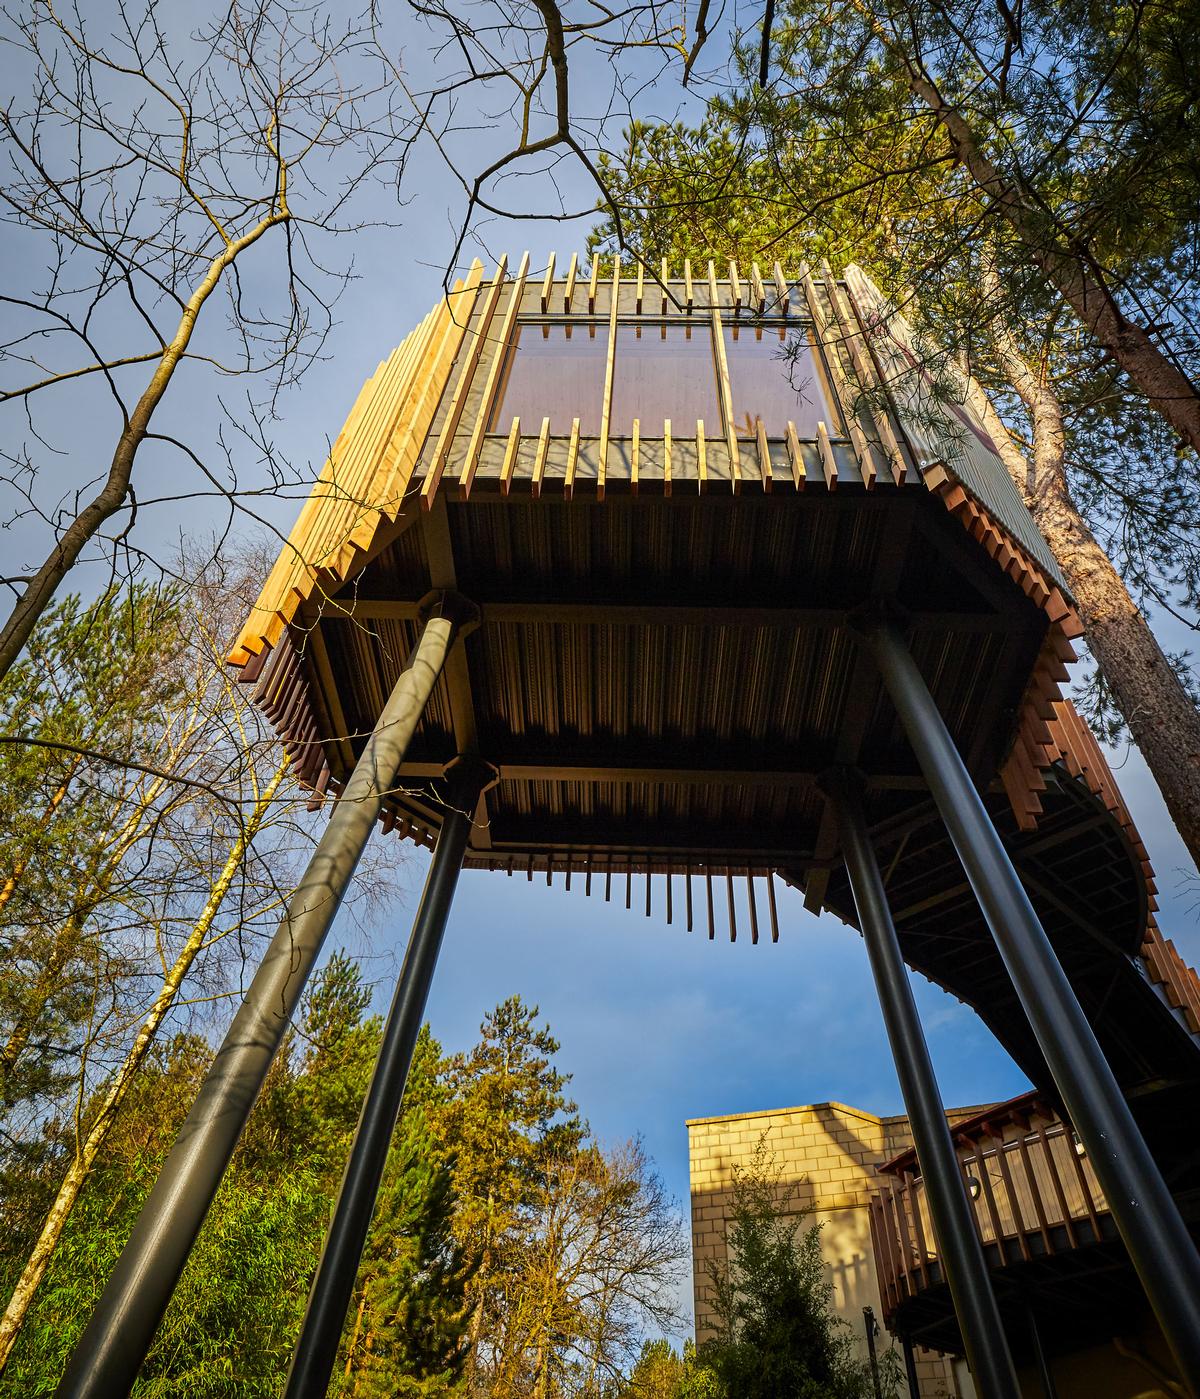 sauna, Scandinavian Snug, and Forest Meditation room: Center Parcs' new Forest Spa concept debuts in the land of Hood Architecture and design news | CLADglobal.com